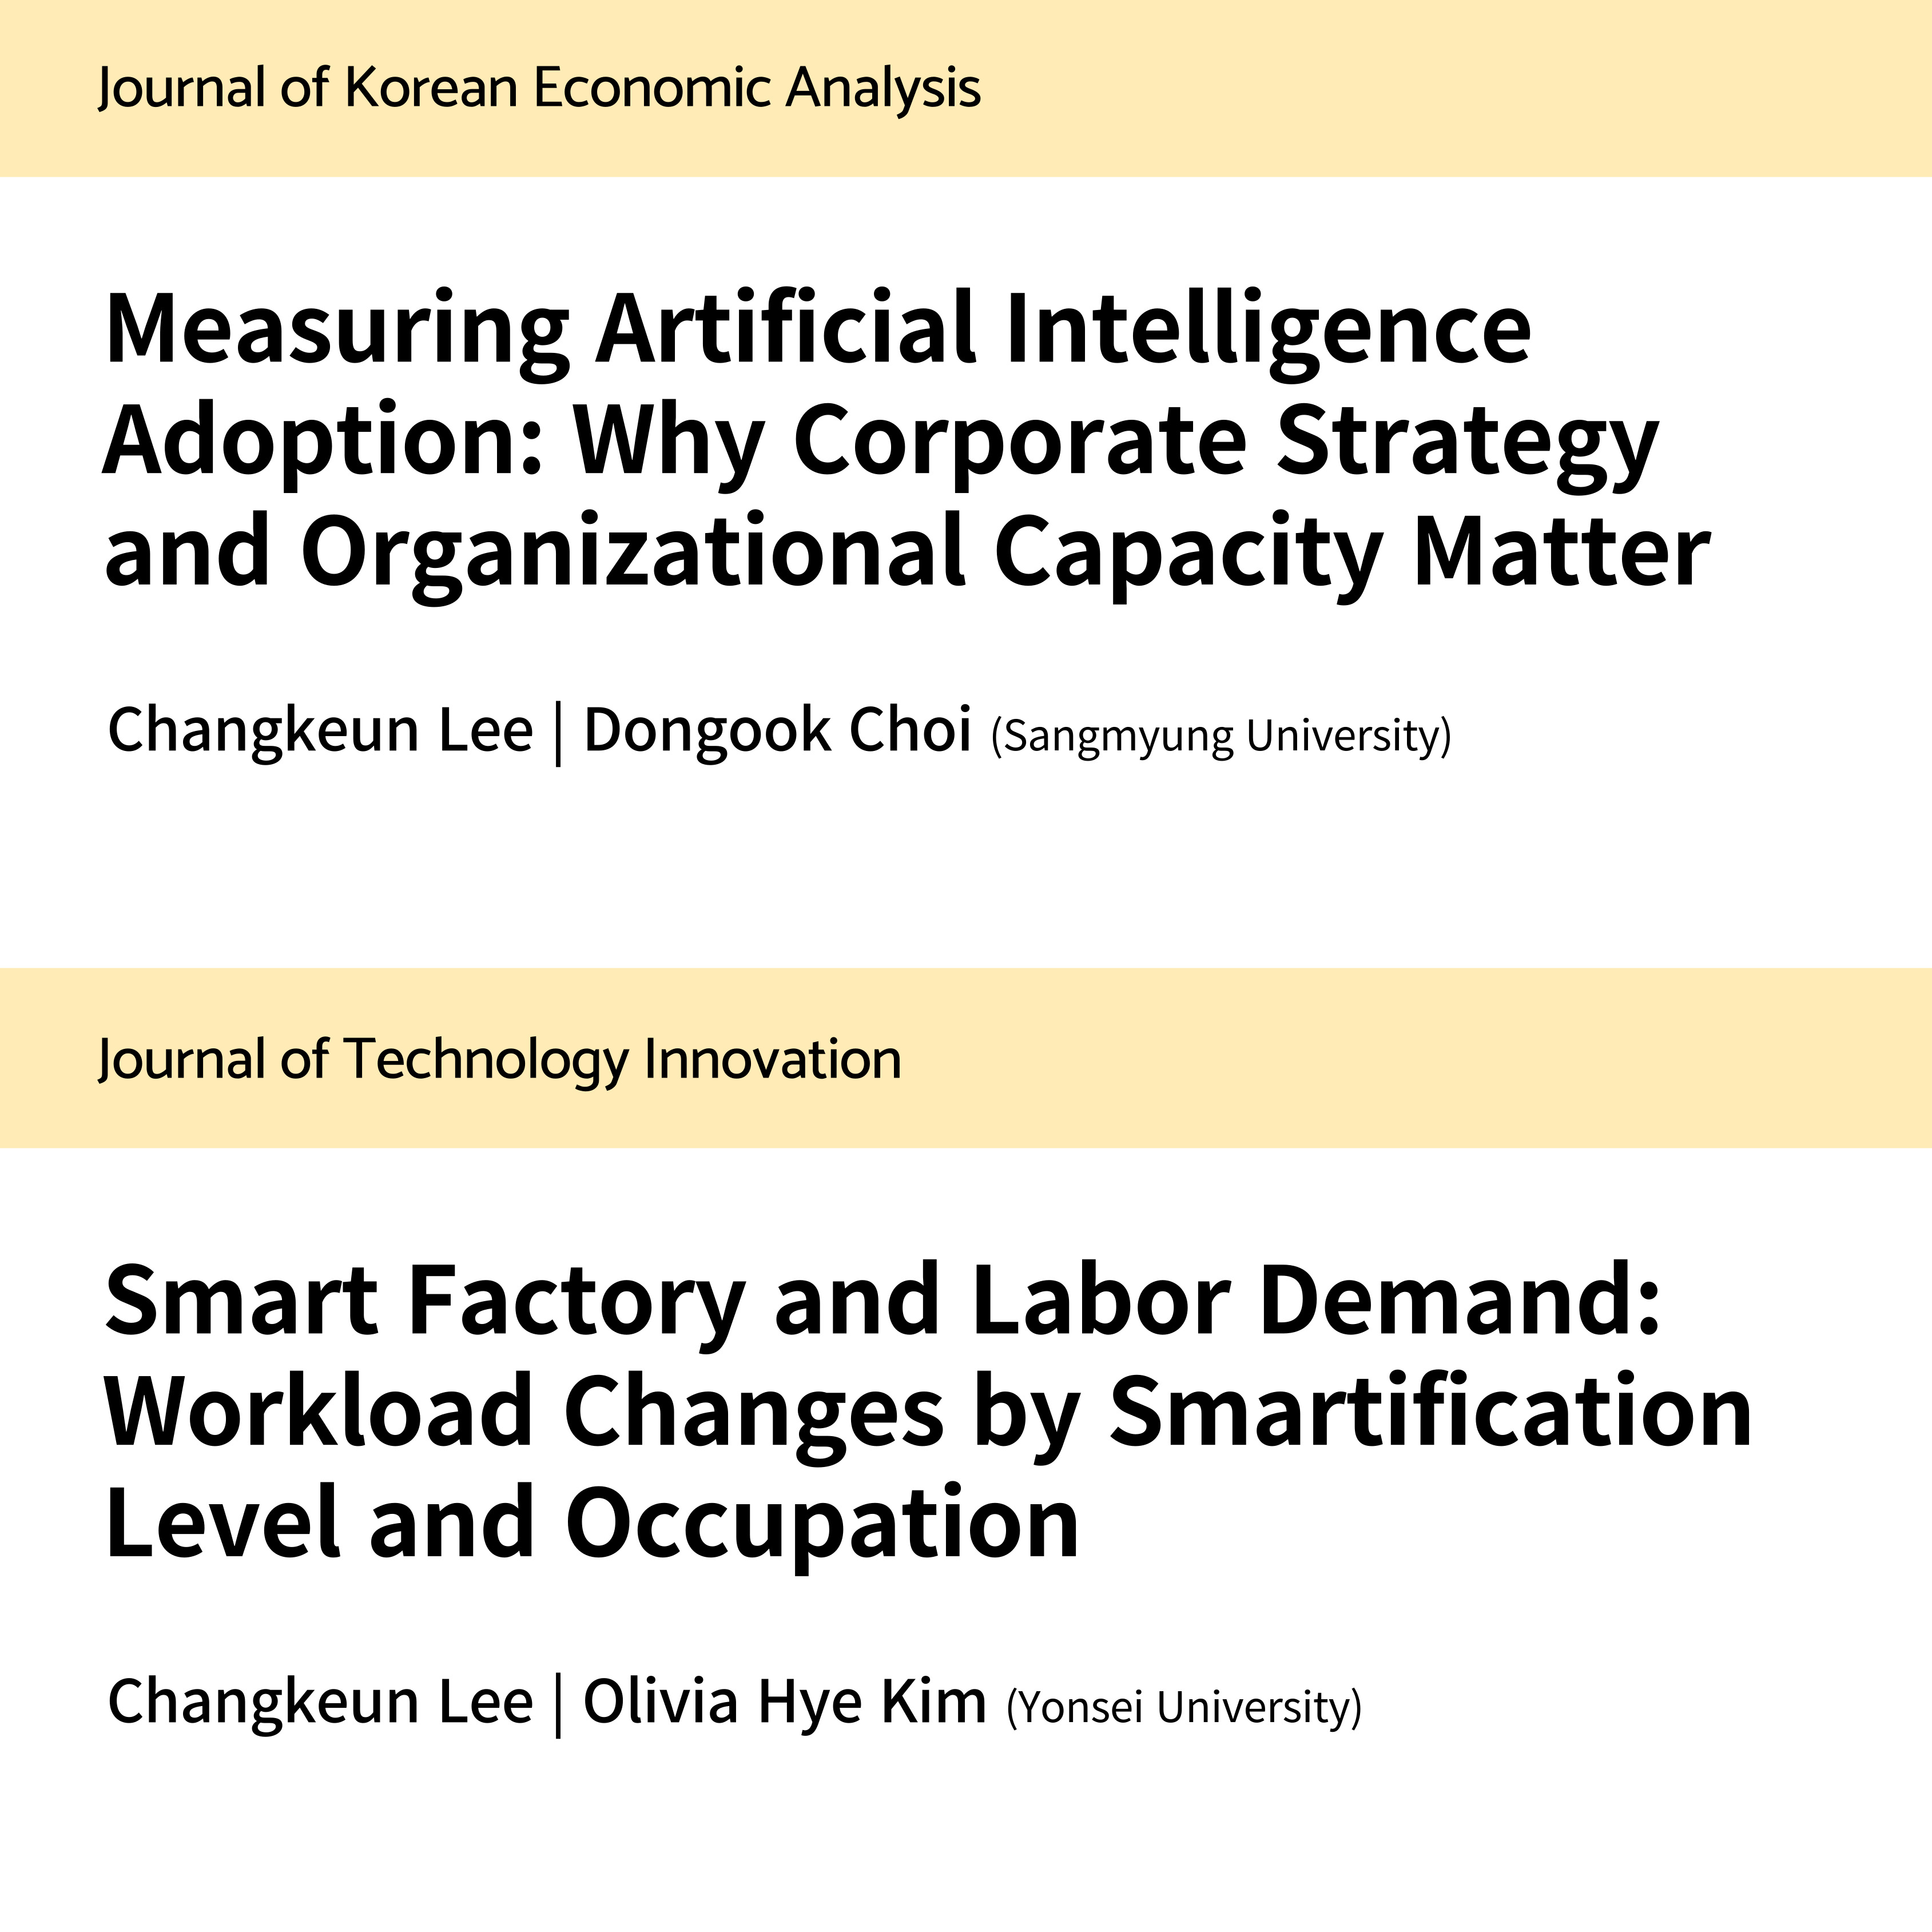 Professor Changkeun Lee published two papers about artificial intelligence and automation in Korean journals